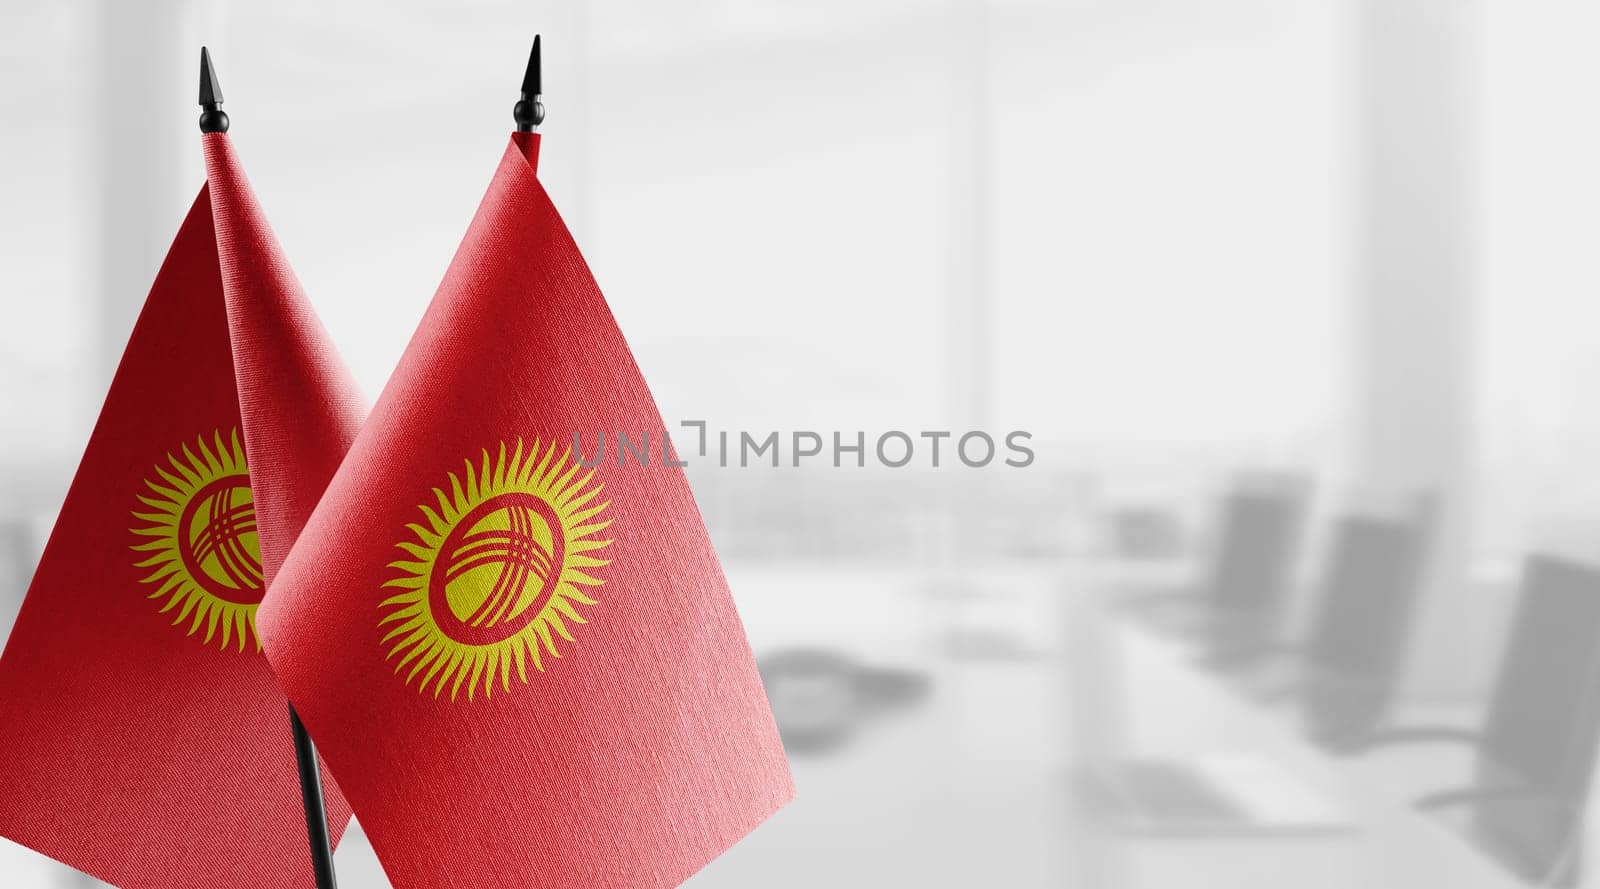 Small flags of the Kirghizia on an abstract blurry background by butenkow